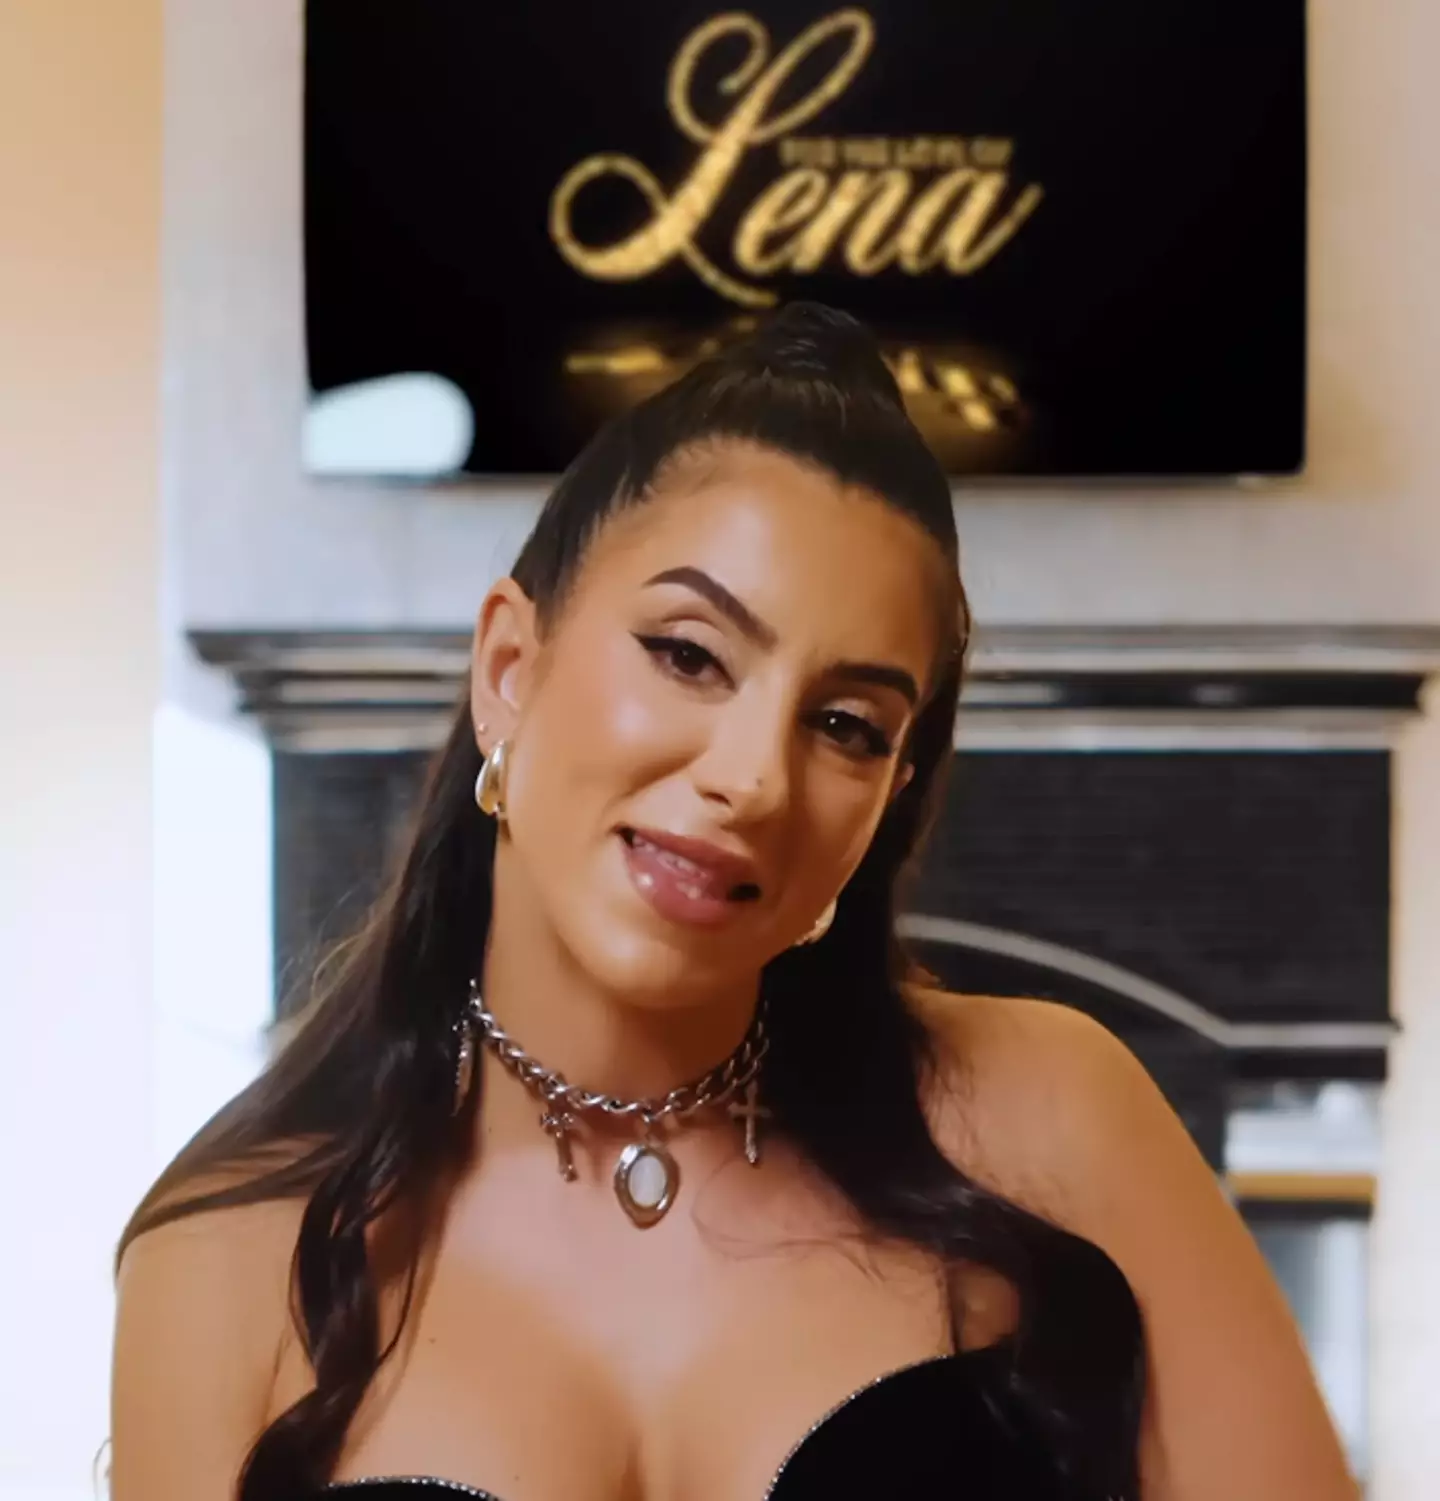 Speaking to TMZ, Lena the Plug addressed the criticism her husband has faced.